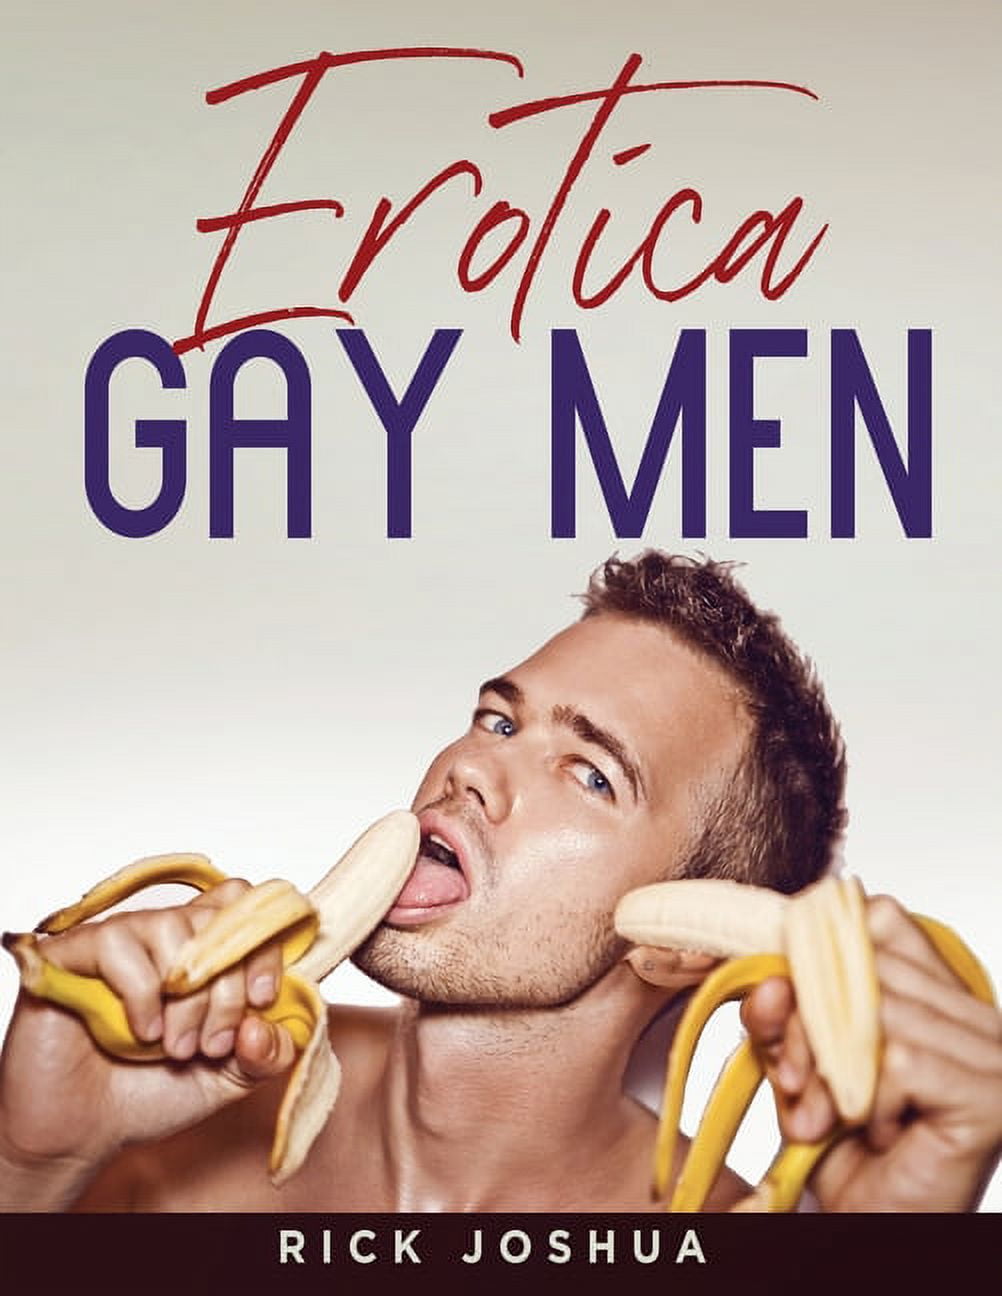 Erotica Gay Men: Adults Stories MM Alpha Male Hot Sex Short MM, Taboo Age  Gap, Daddy, Threesome, Explicit Dirty Rough Family, Dark Romance, First  Time, Stepdaddy (Paperback) - Walmart.com